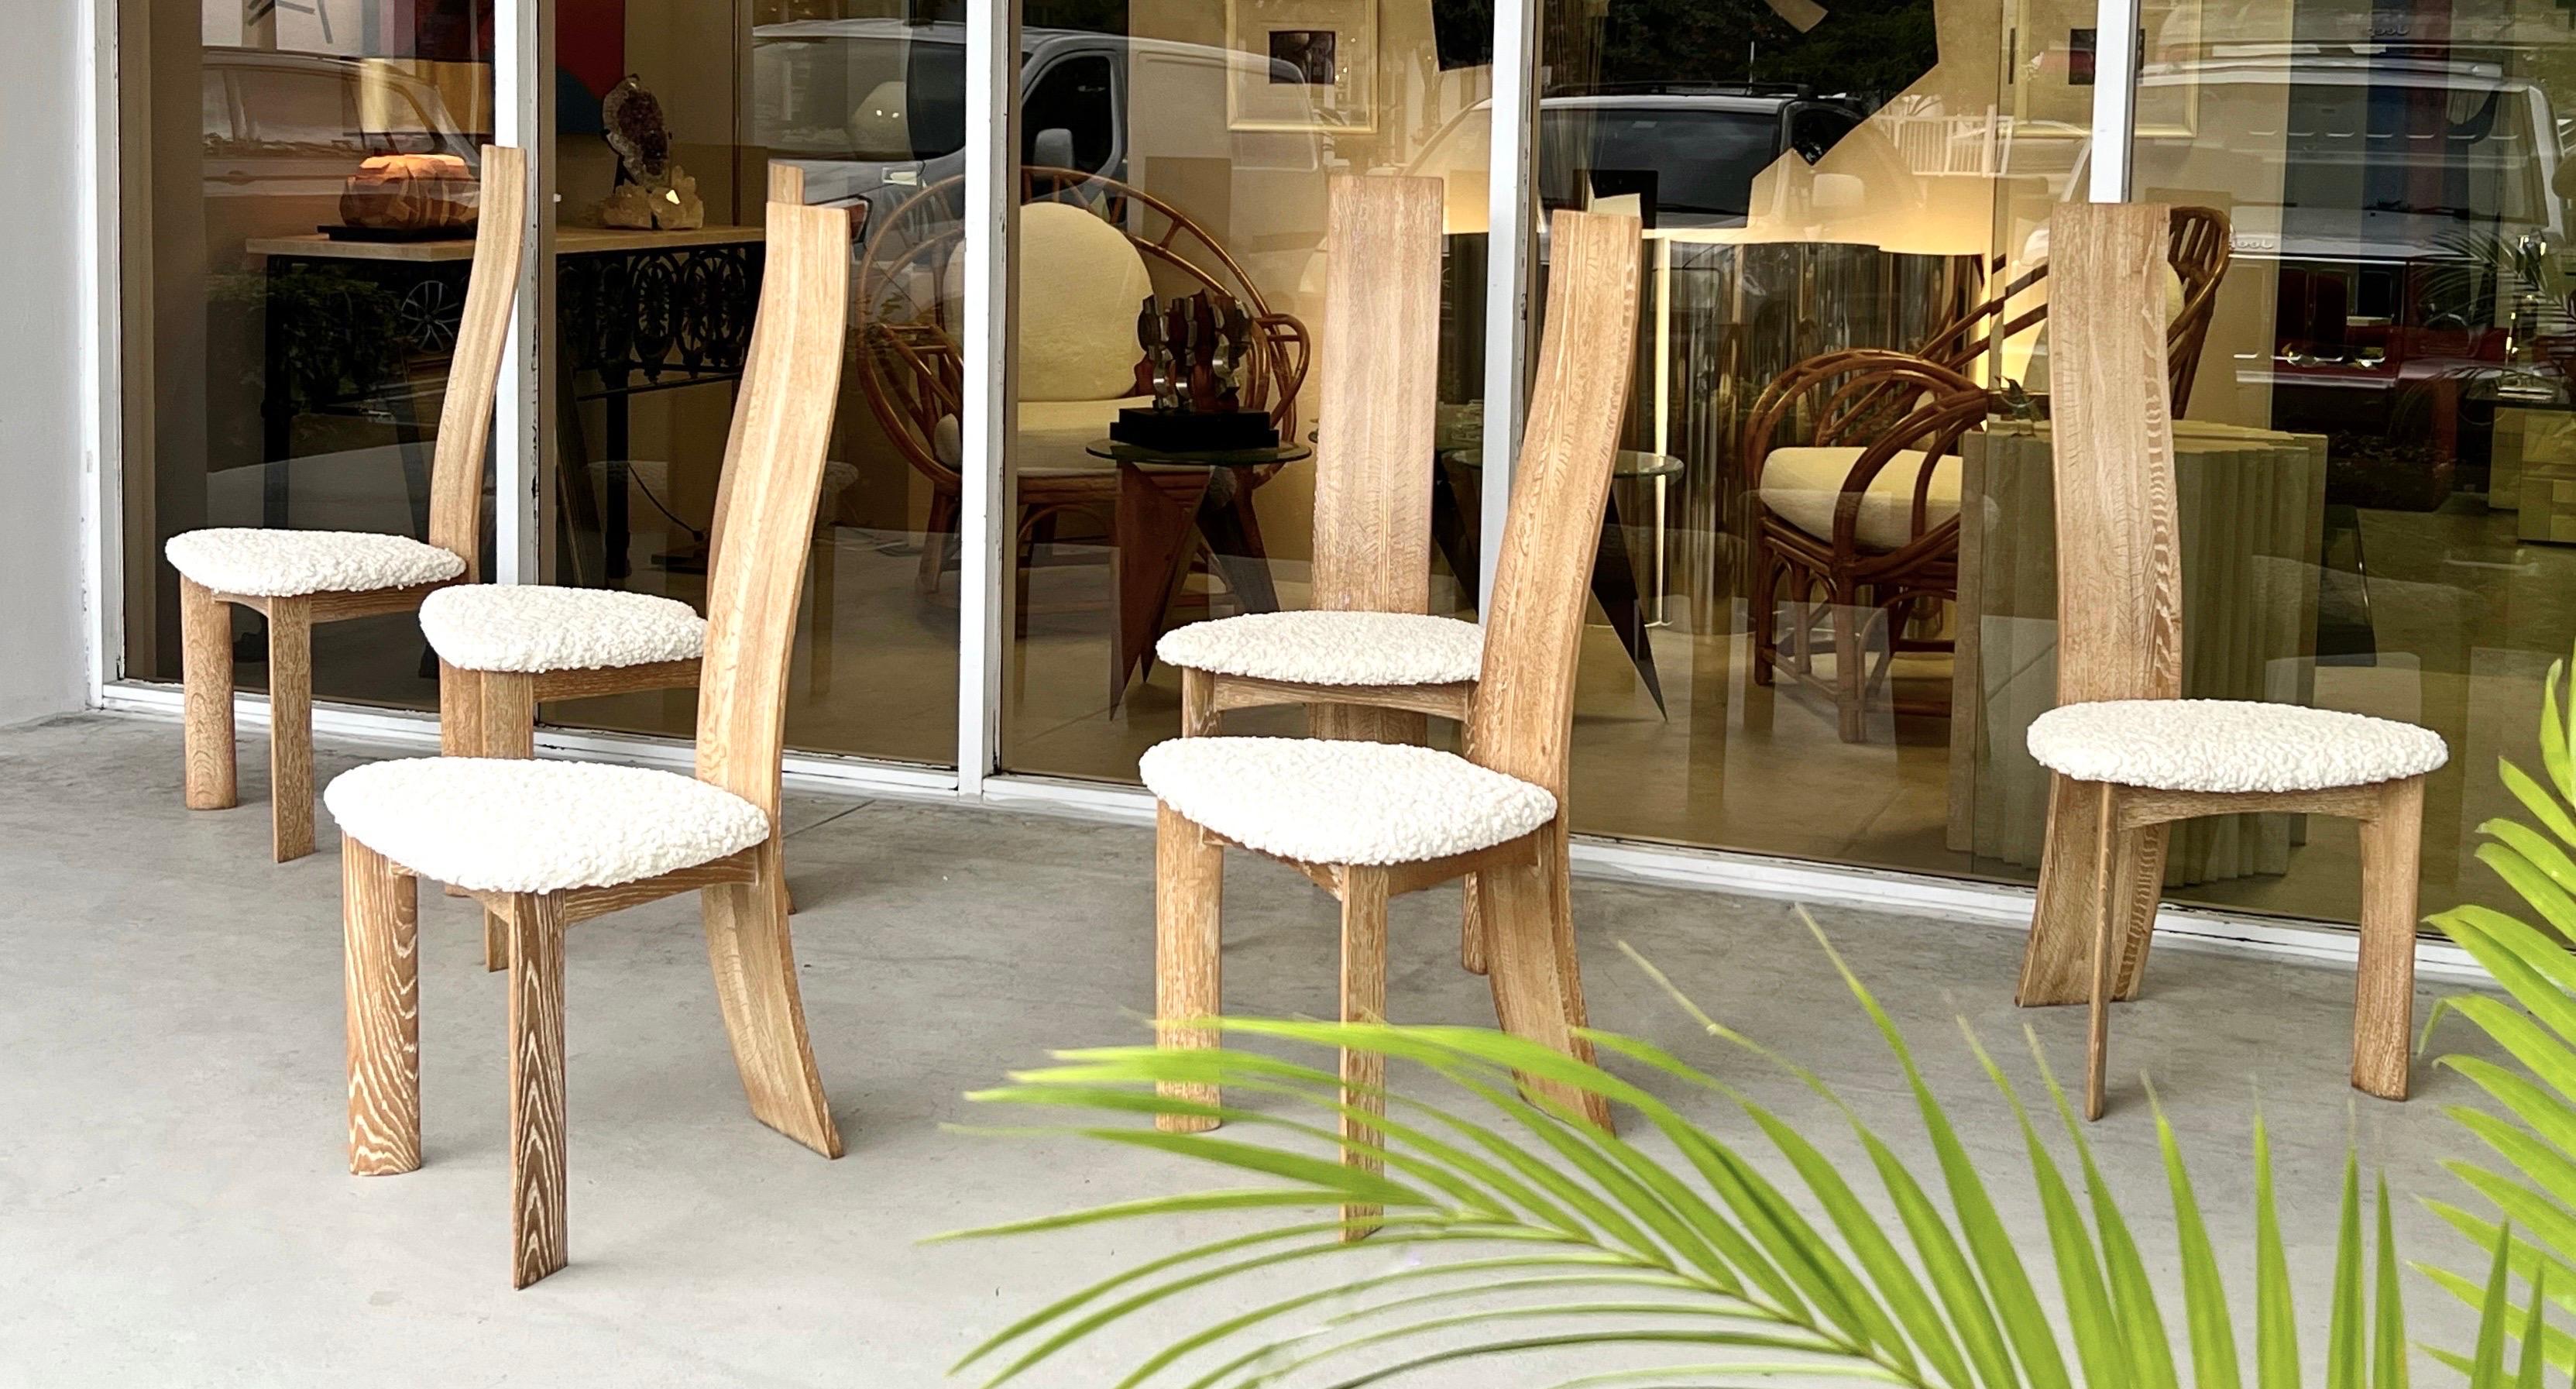 Set of 6 Cerused oak chairs by Bob & Dries Den Bergh. The chairs tall backs are slender and end extremely thin at the top. The look is very sculptural and Minimalist with a sensitive organic touch to it.